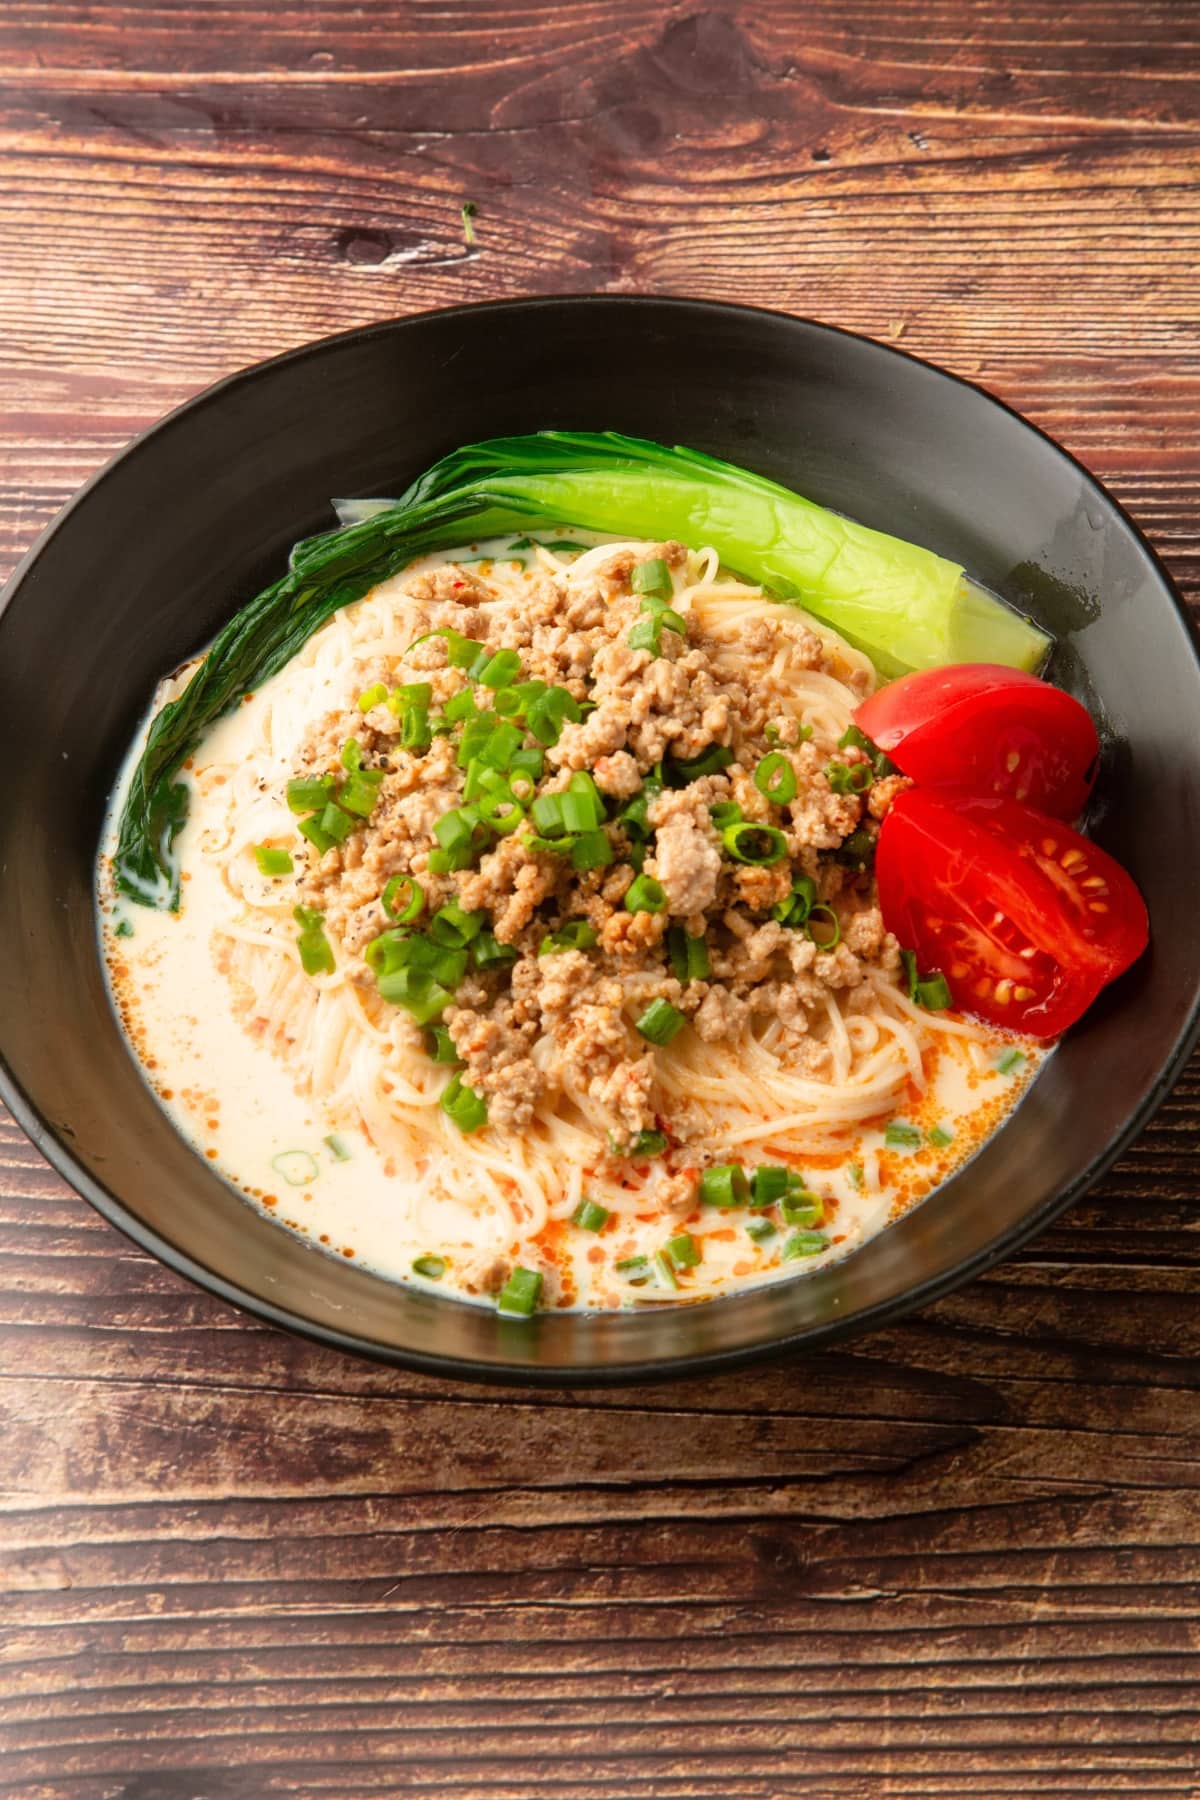 Homemade Warm Somen Noodles with Vegetables